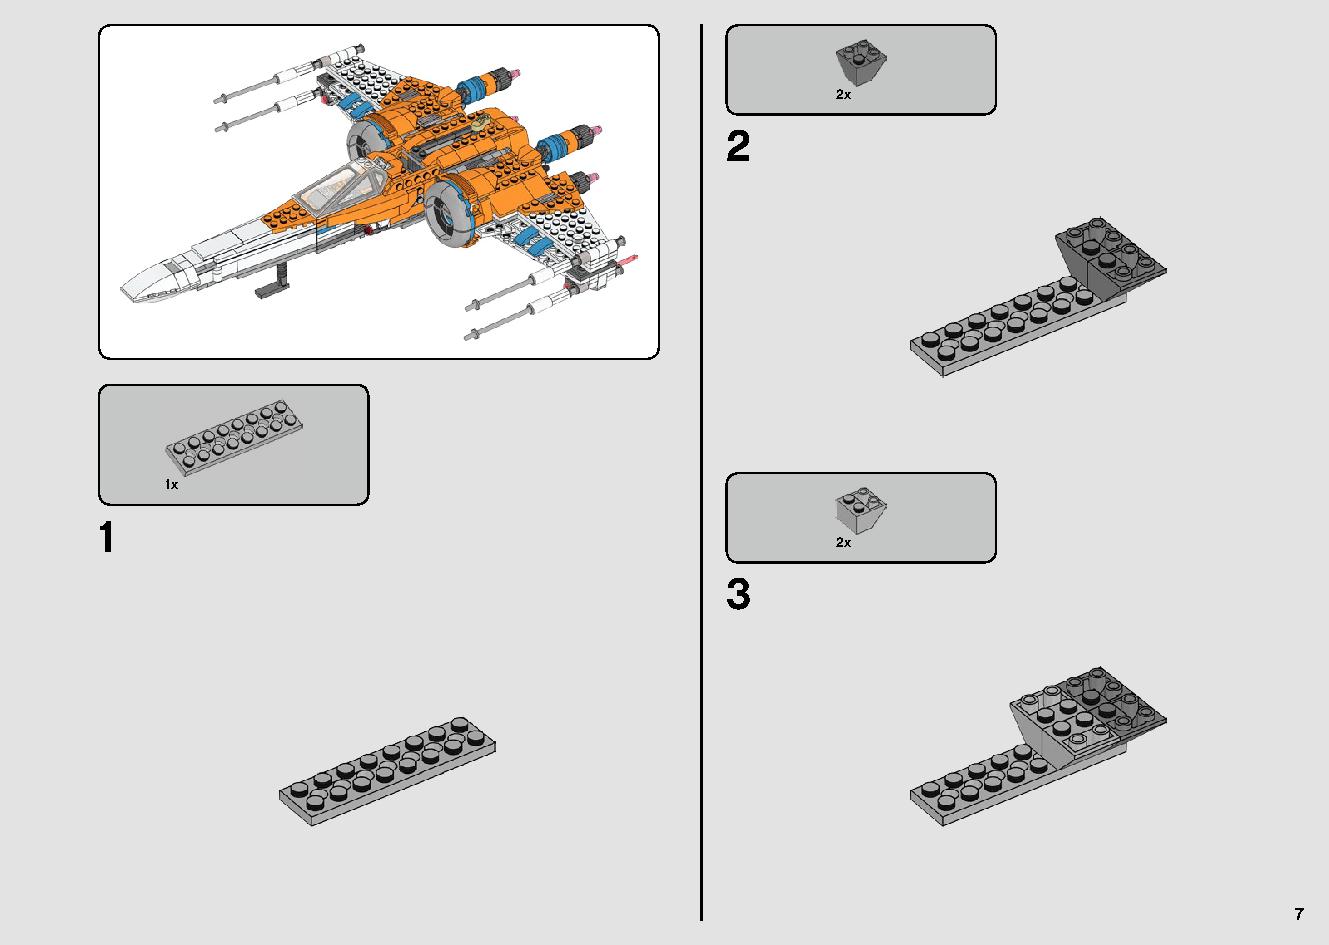 Poe Dameron's X-wing Fighter 75273 LEGO information LEGO instructions 7 page